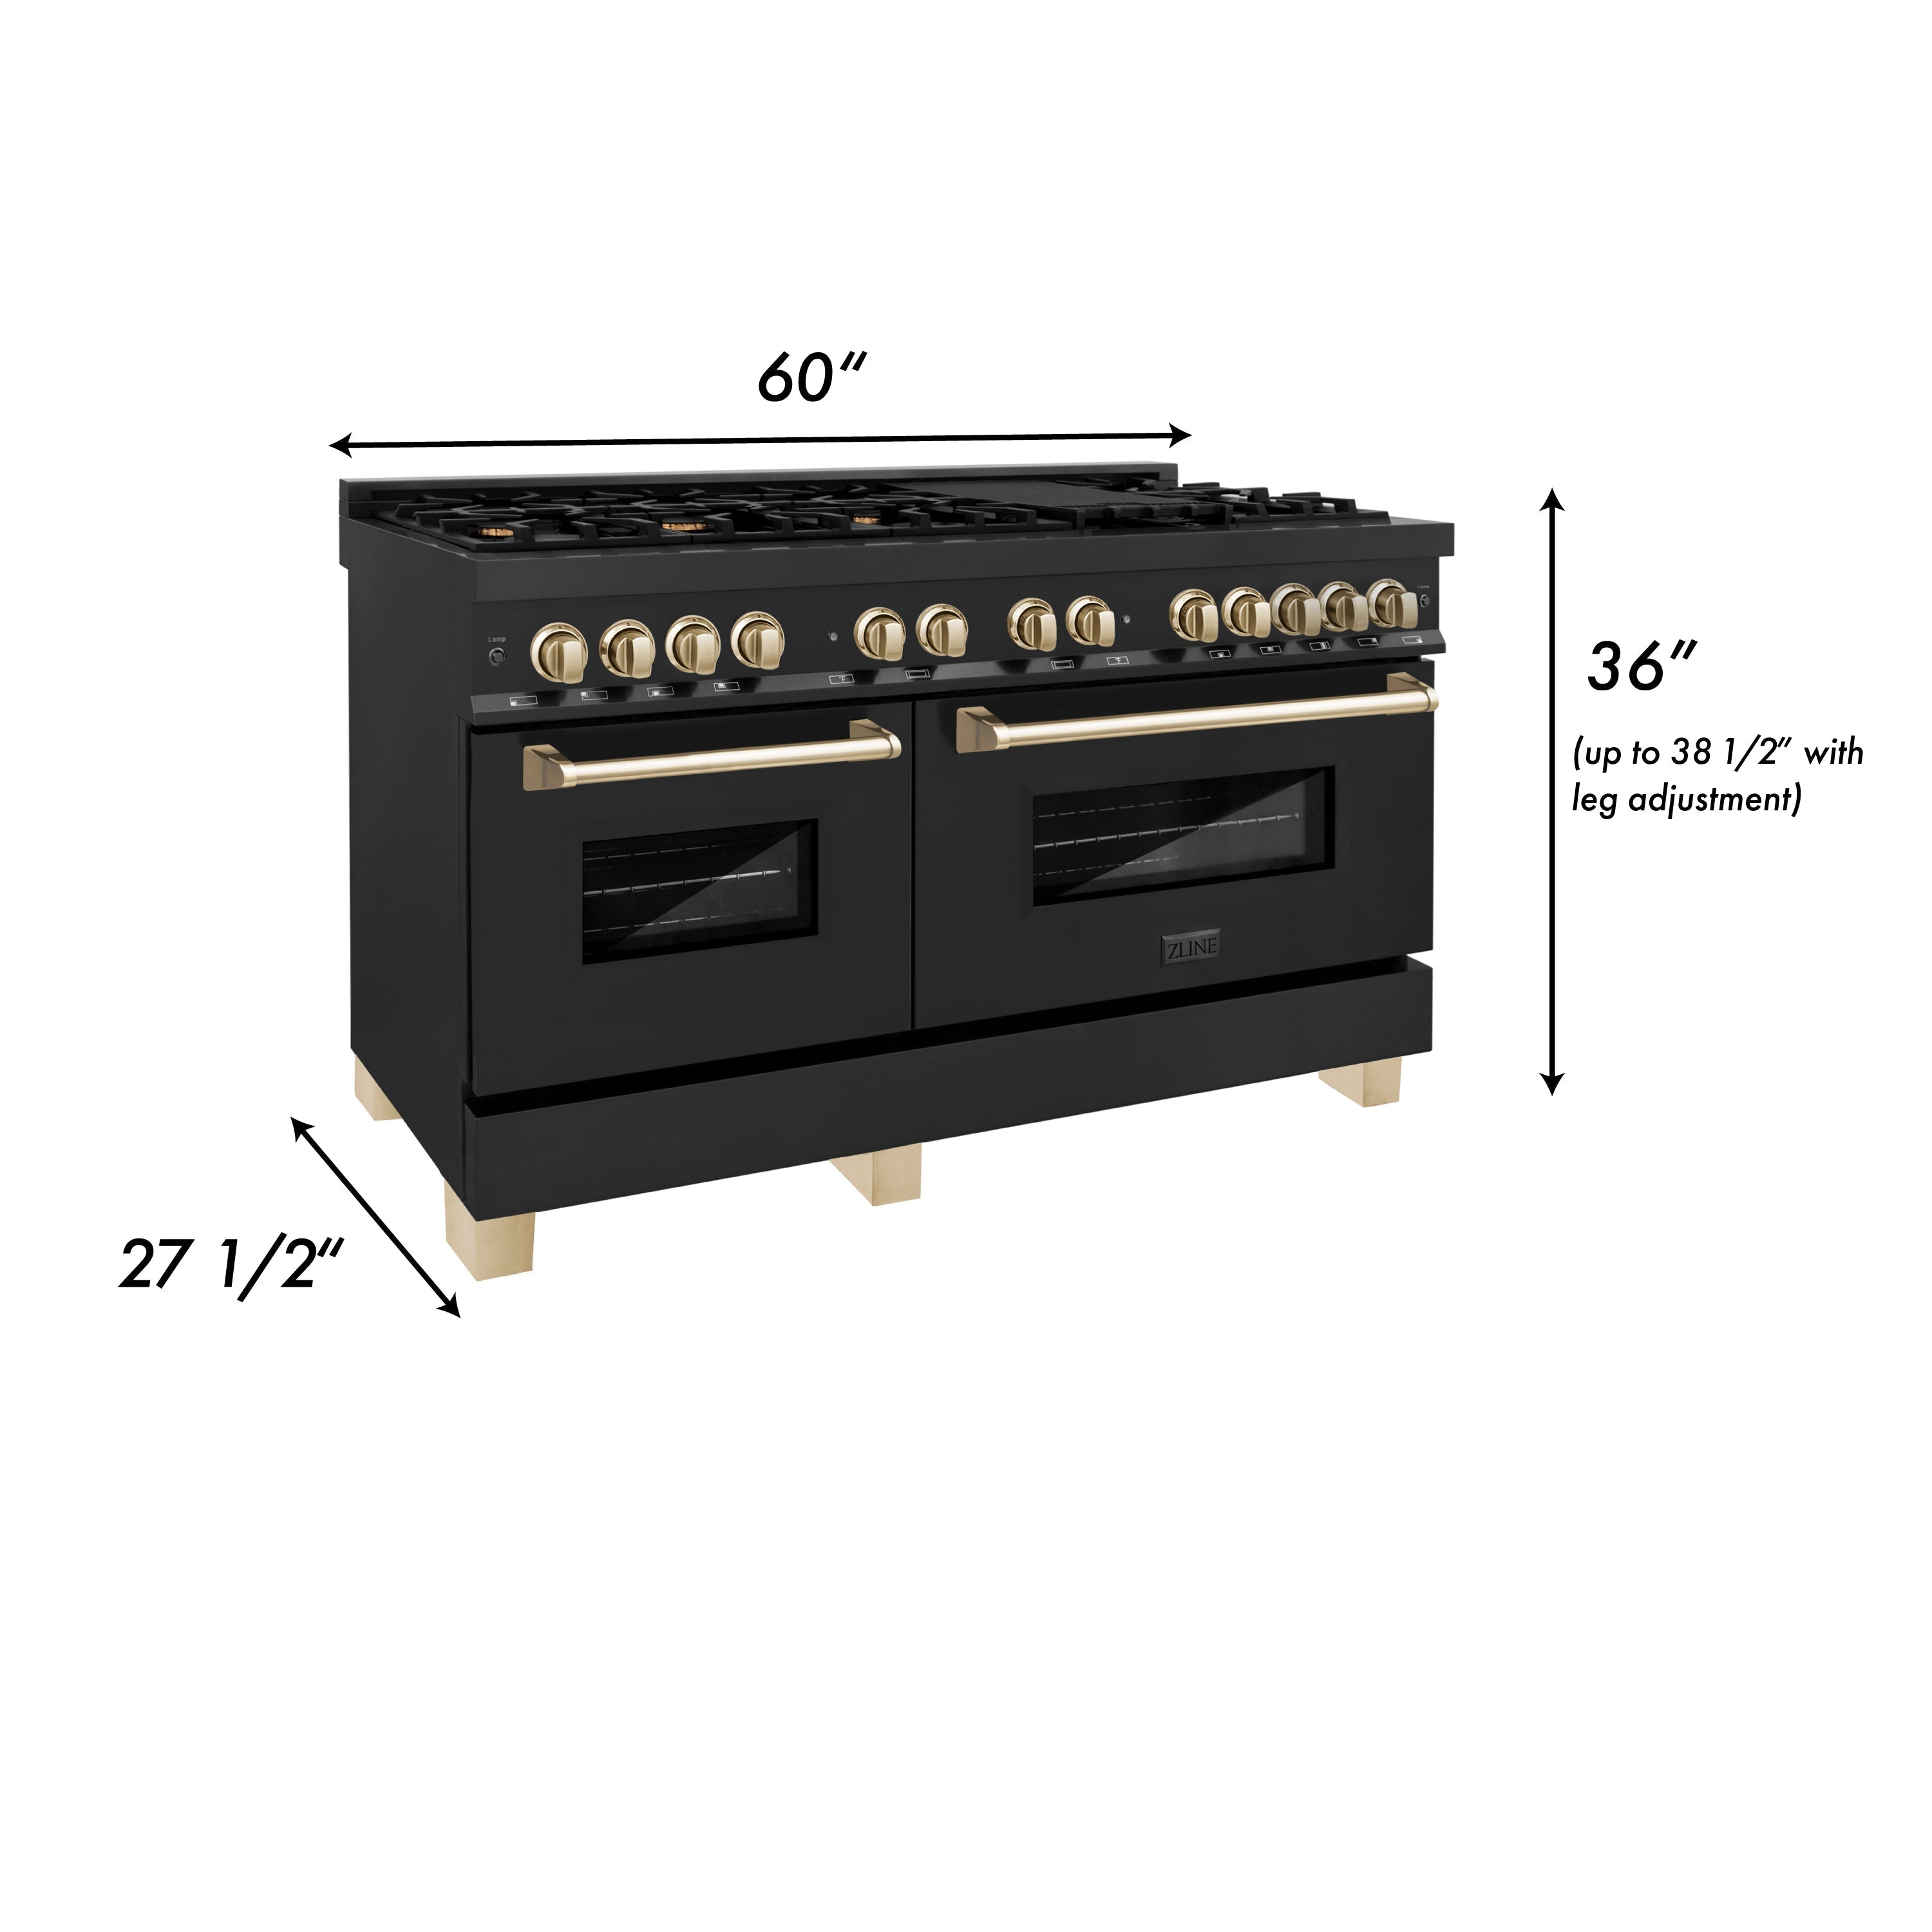 ZLINE Autograph Edition 60" 7.4 cu. ft. Dual Fuel Range with Gas Stove and Electric Oven in Black Stainless Steel with Polished Gold Accents (RABZ-60-G)